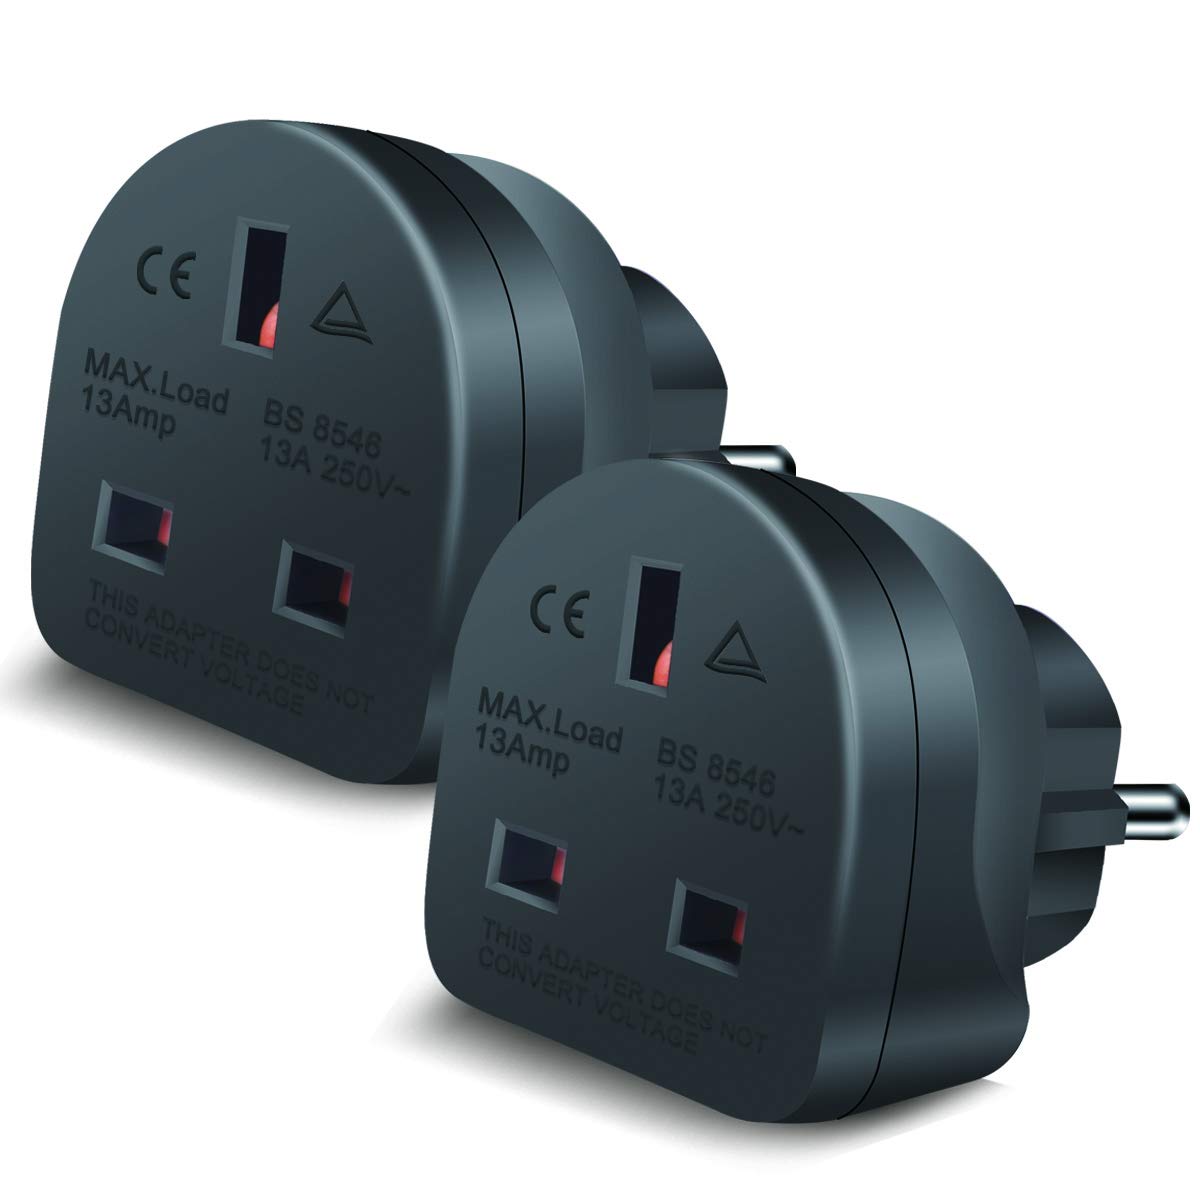 EXTRASTAR UK to EU Europe European Travel Adapter, 2 Pack 3 Pin to 2 Pin Plug Adapter Convertor for Germany, France, Spain, Portugal, Greece, Netherlands and more - Black